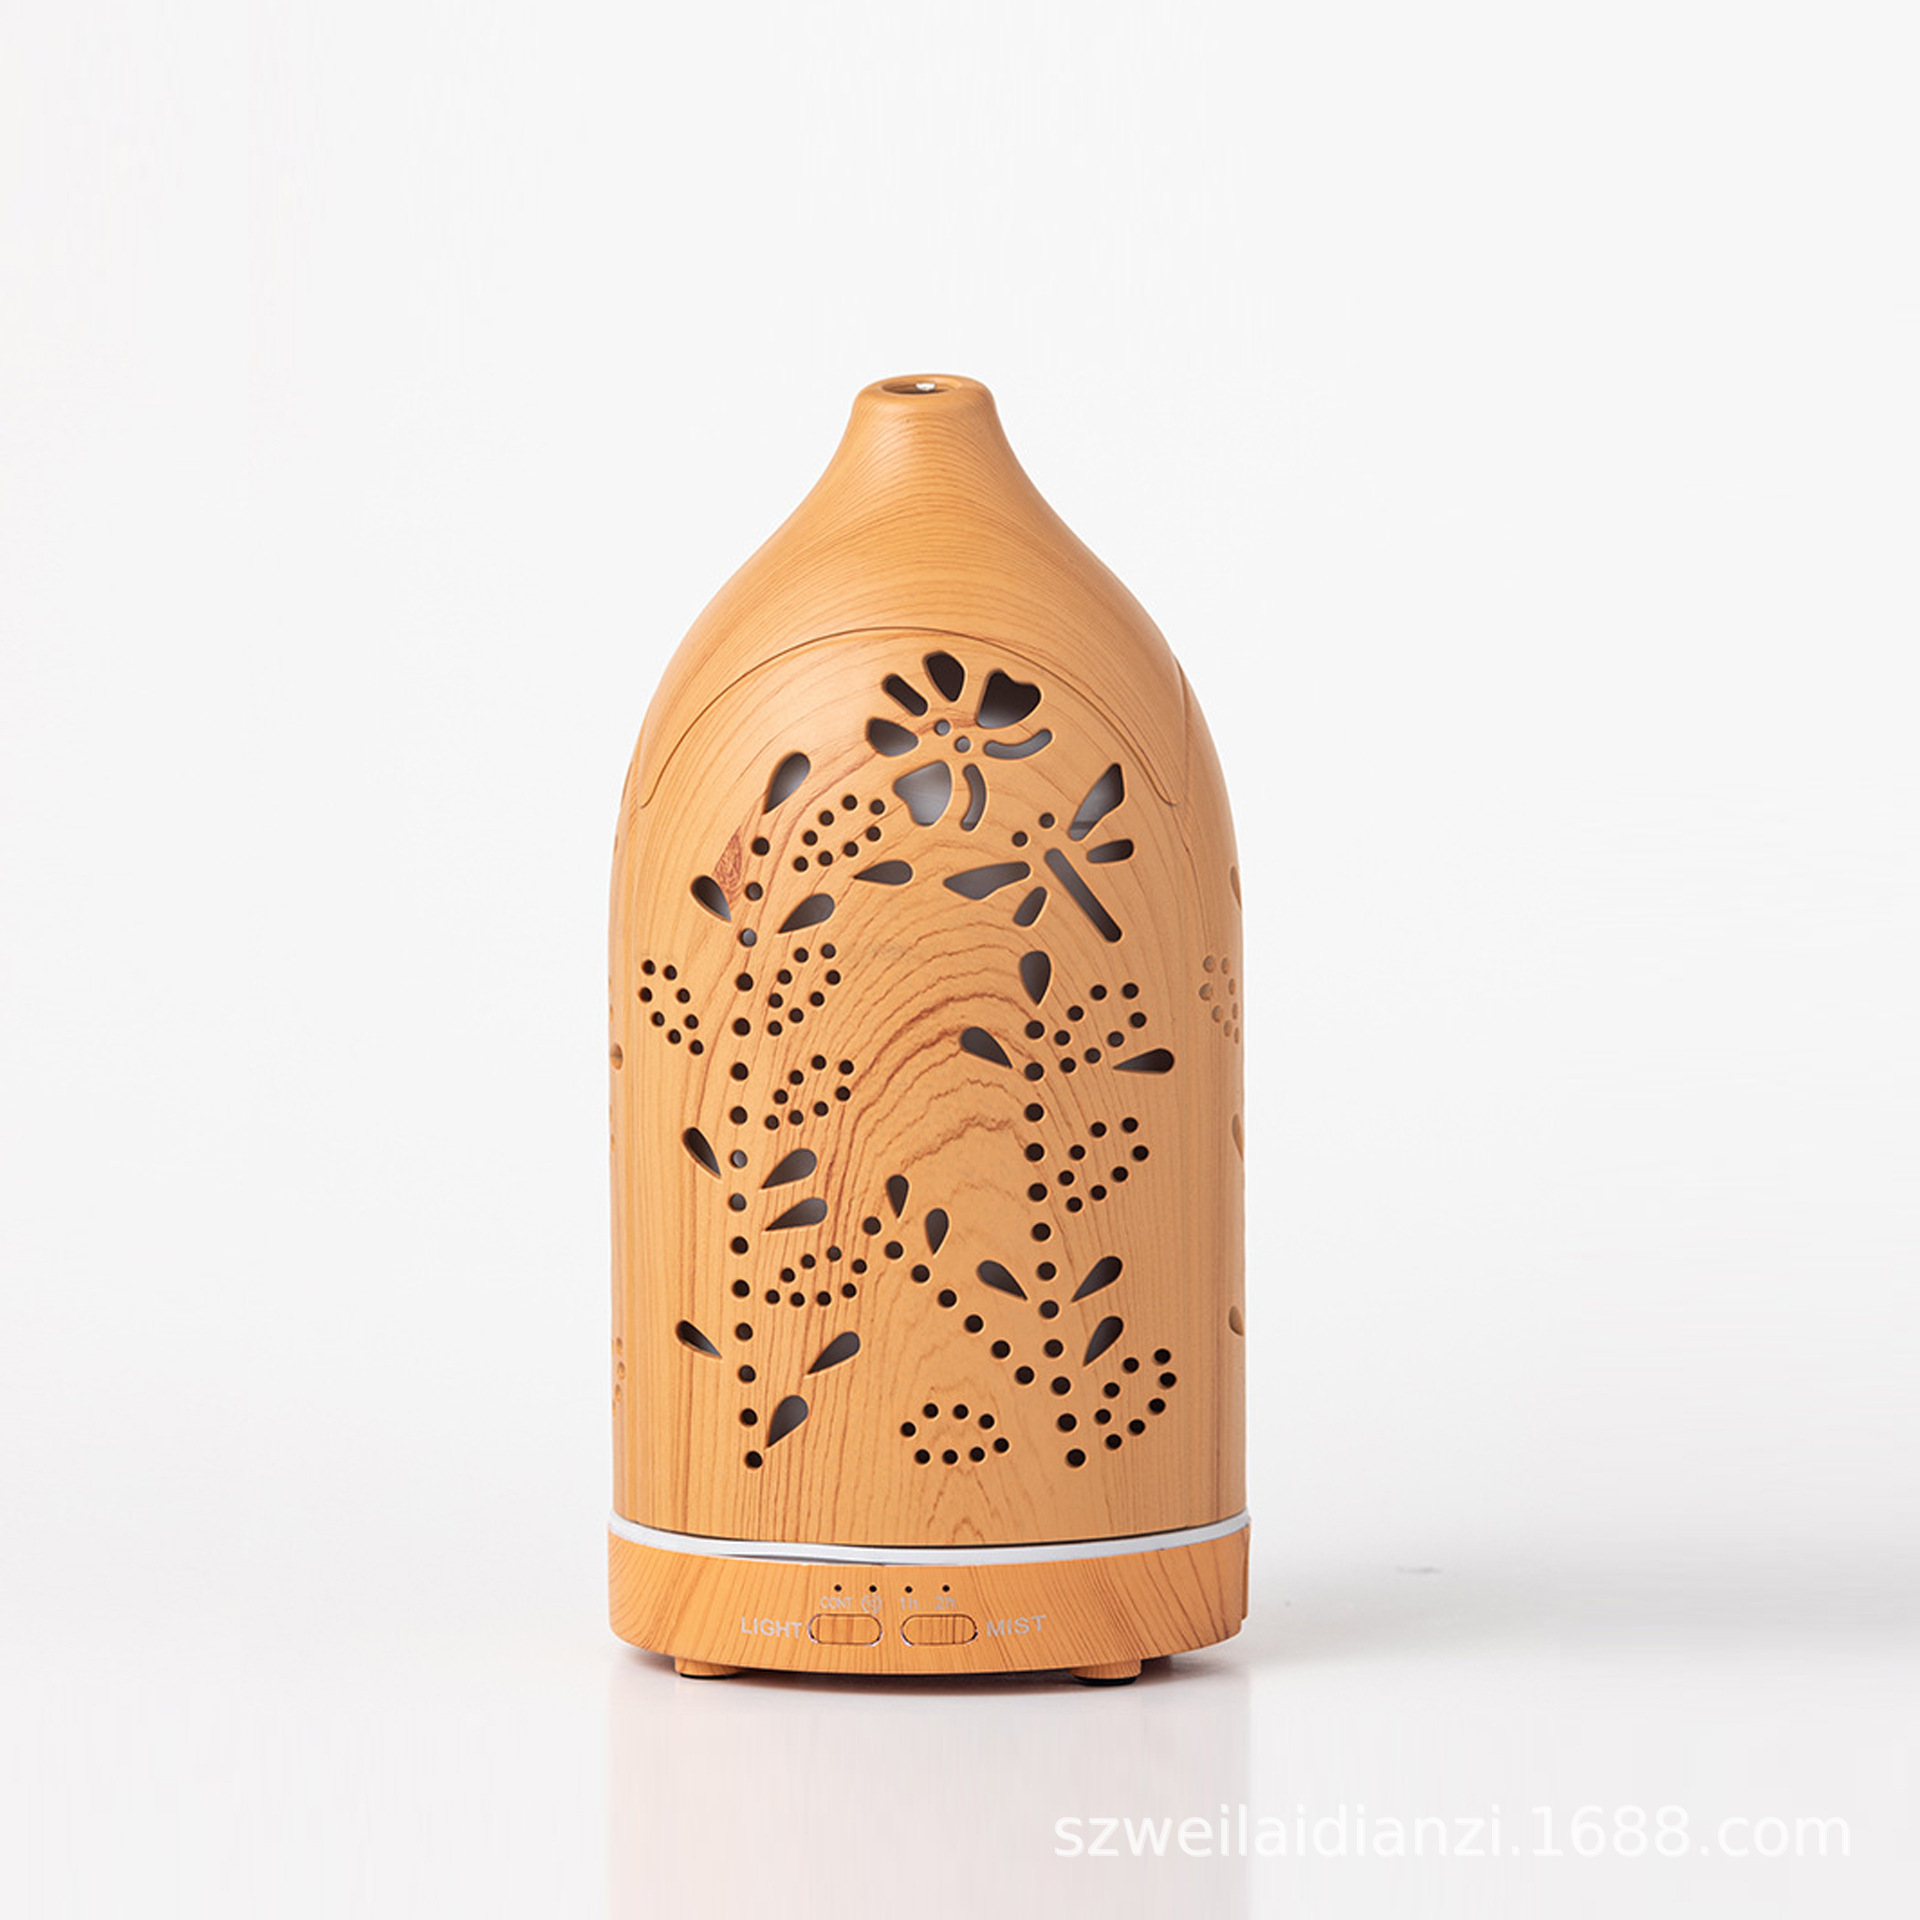 Rotating Aromatherapy Humidifier Wood Grain Household Hollow Vase Atomizer Factory Direct Sales Name: Love Flower 127